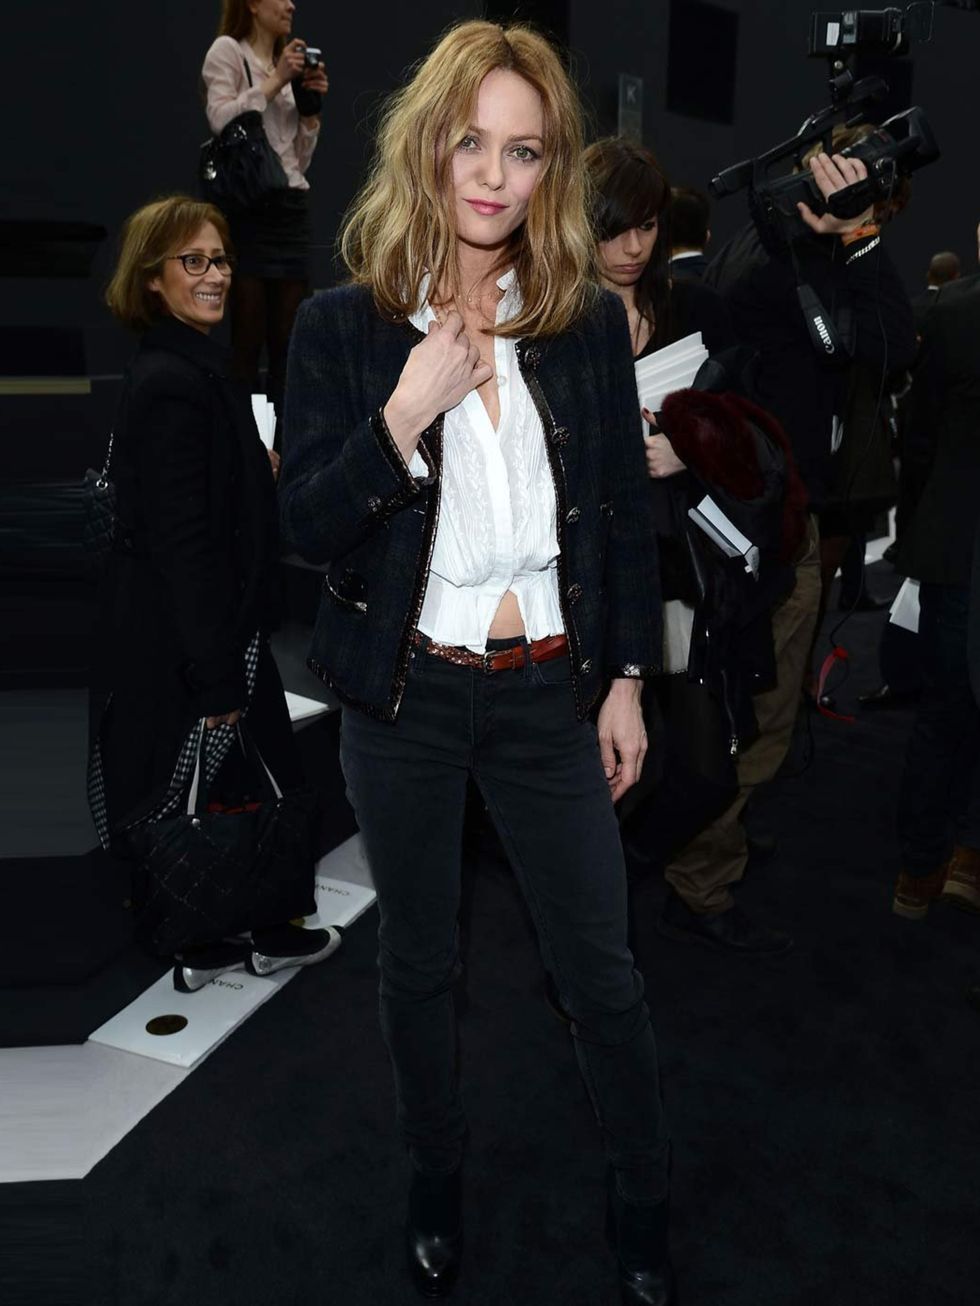 <p><a href="http://www.elleuk.com/star-style/celebrity-style-files/vanessa-paradis">Vanessa Paradis</a> attends the <a href="http://www.elleuk.com/catwalk/designer-a-z/chanel/autumn-winter-2013/collection">Chanel Autumn Winter 13</a> show, Paris Fashion W